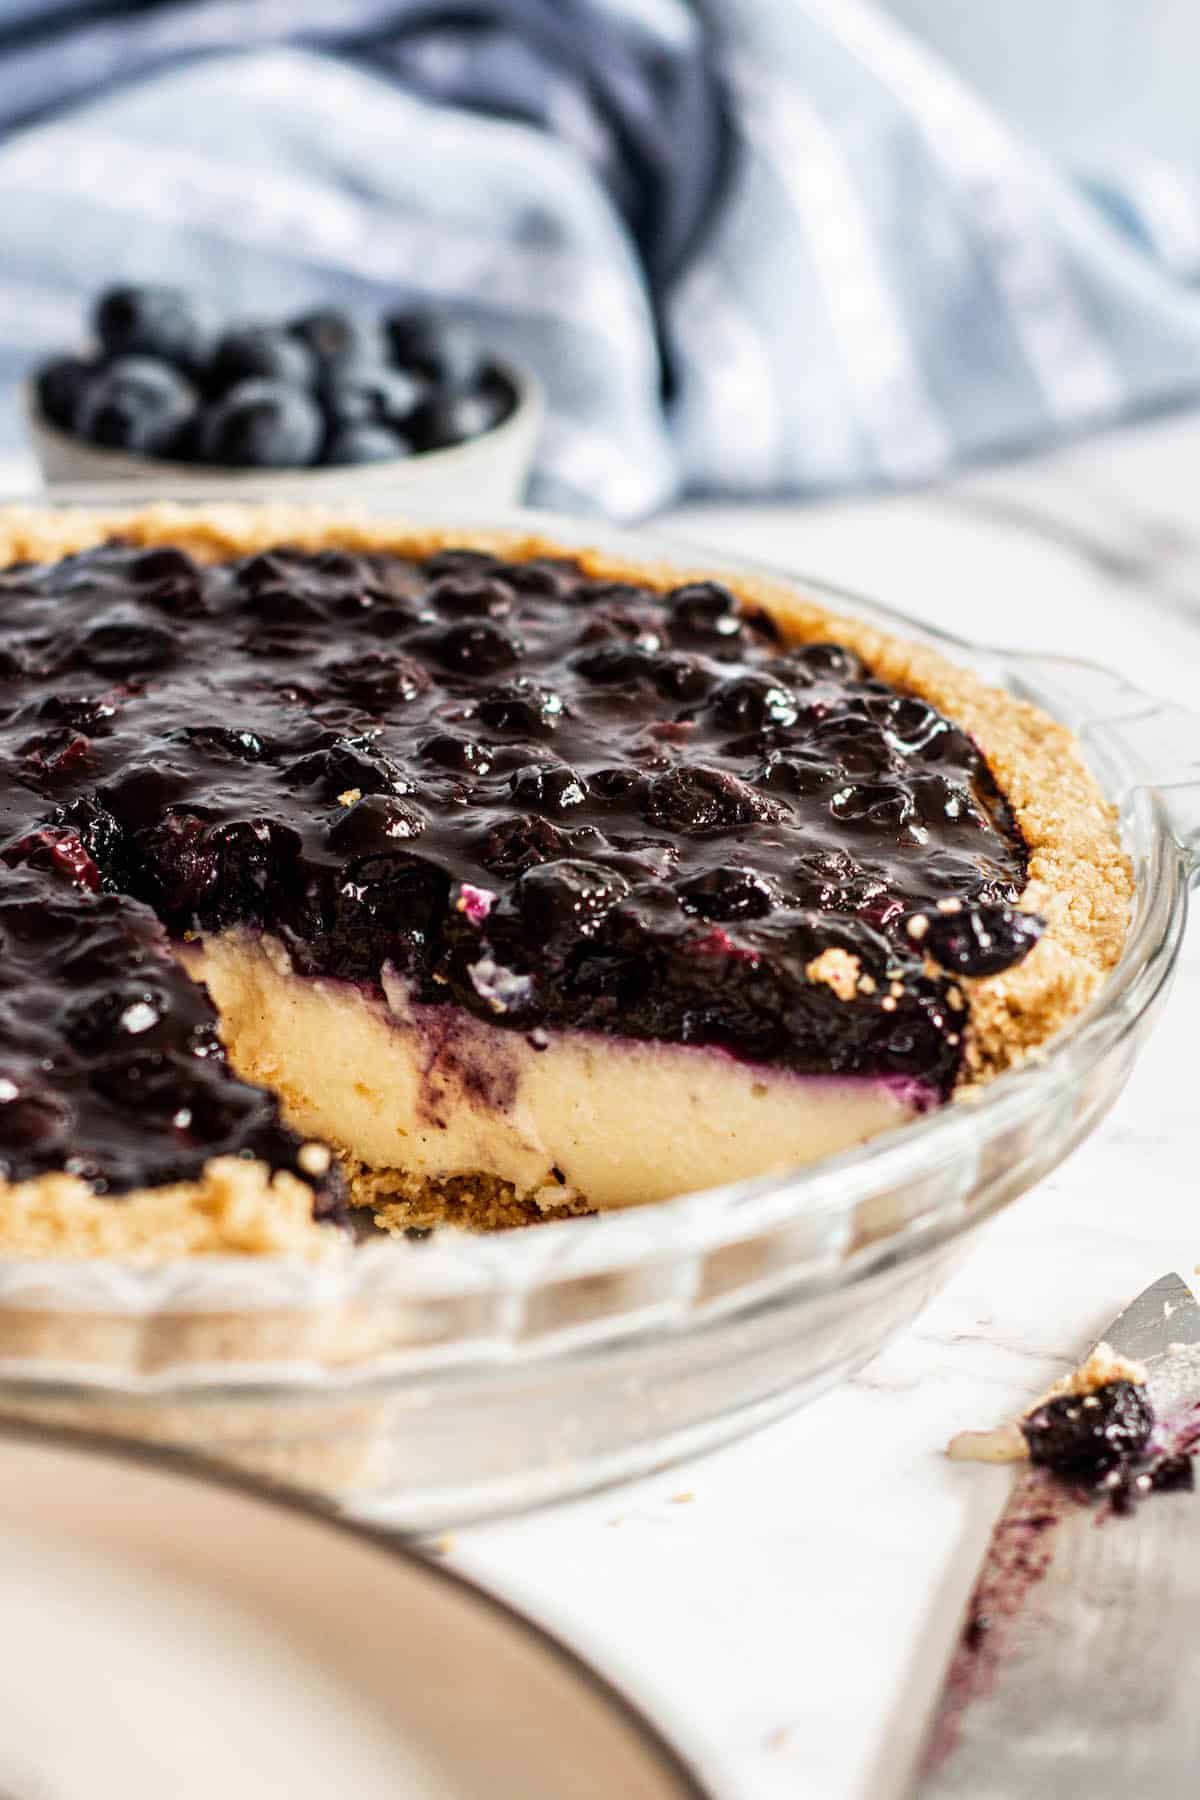 blueberry topped pie.